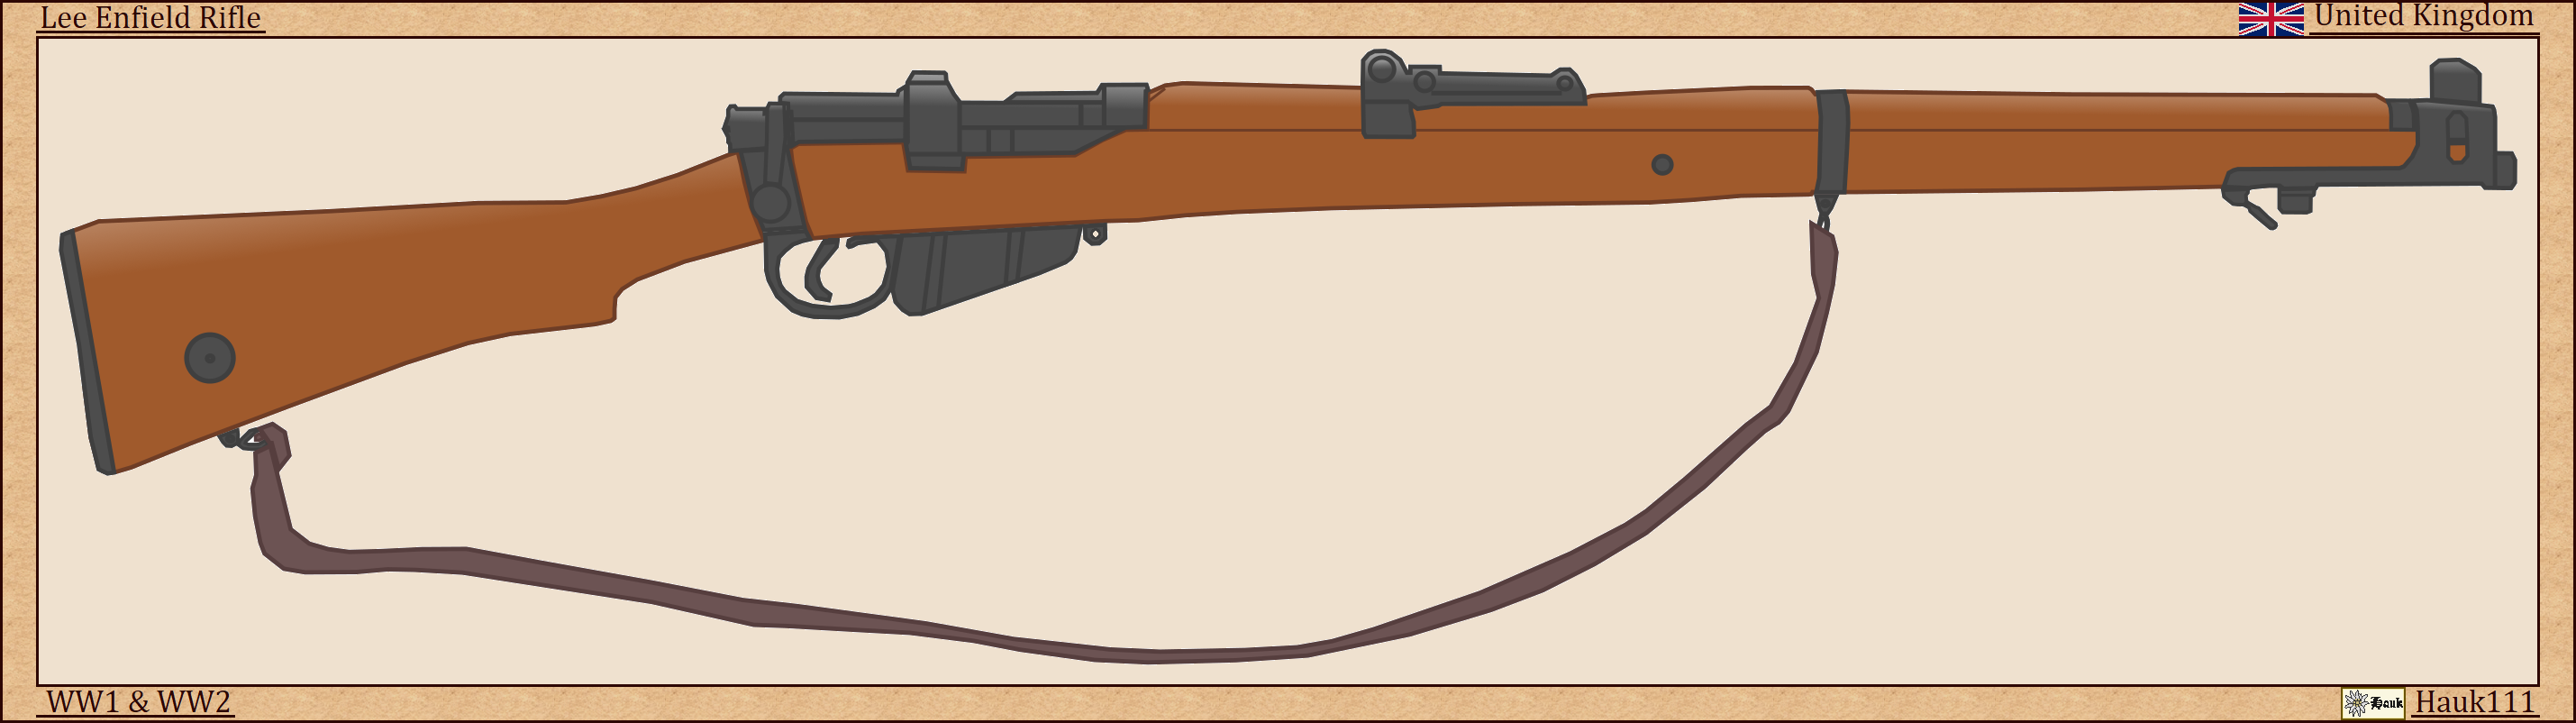 Lee Enfield Rifle by Hauk111 on DeviantArt